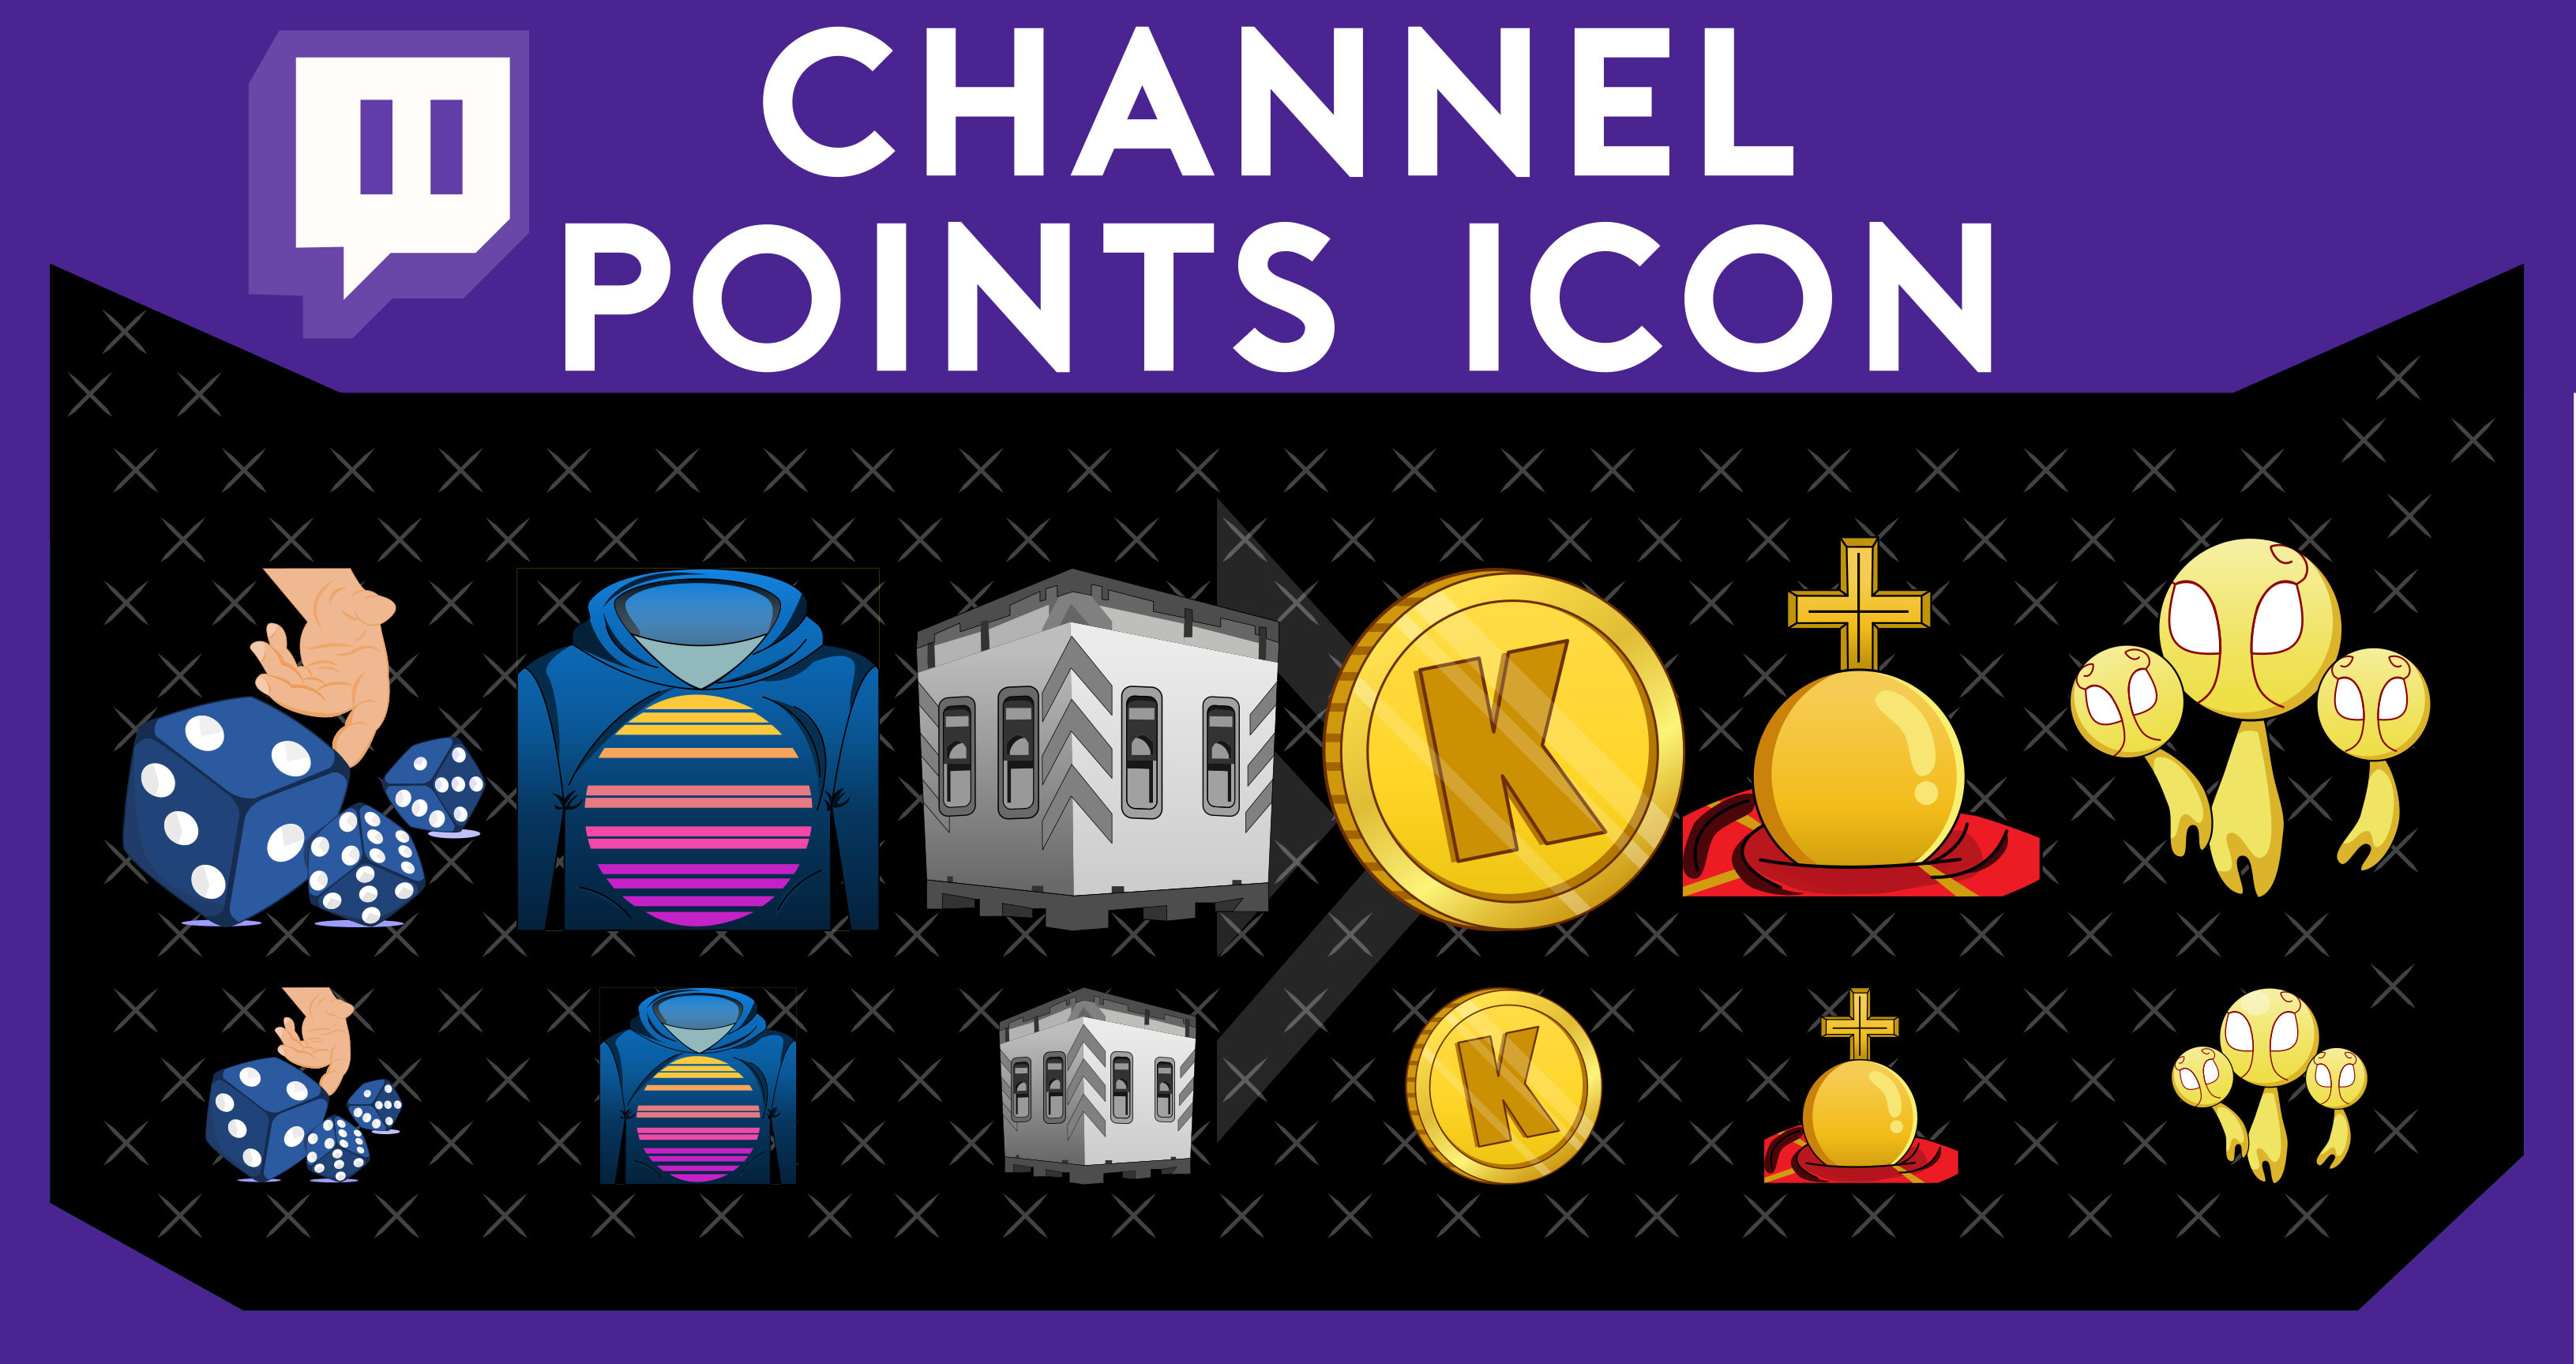 Custom Sub / Bit Badges for Twitch Cheer Channel Point 